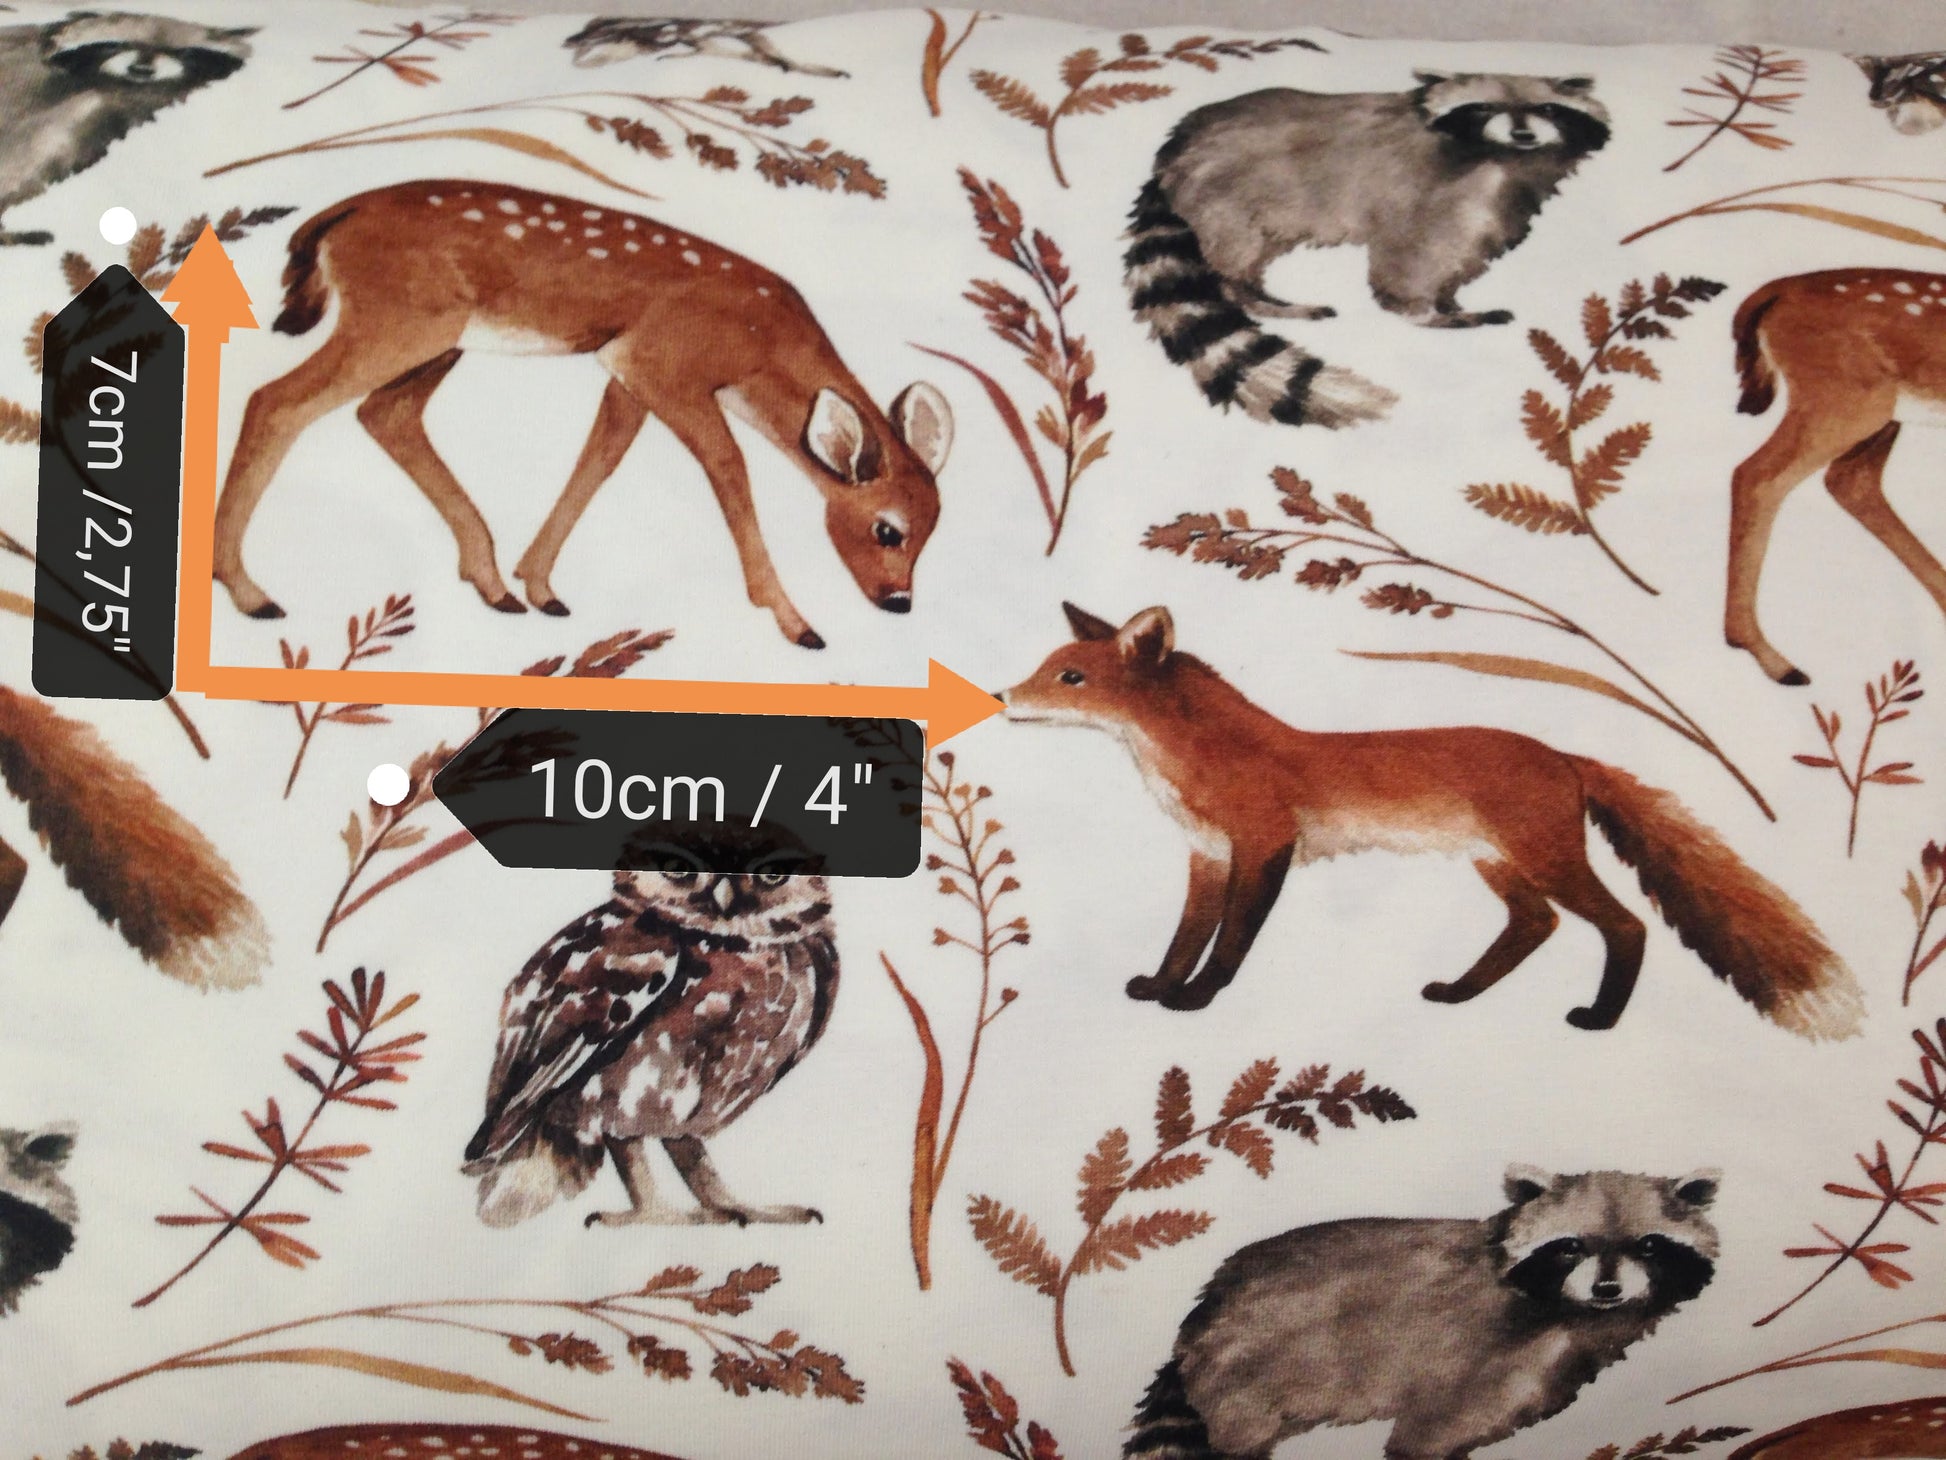 Woodland animals (deers, badgers, foxes and owls)and plants on white background jersey fabric